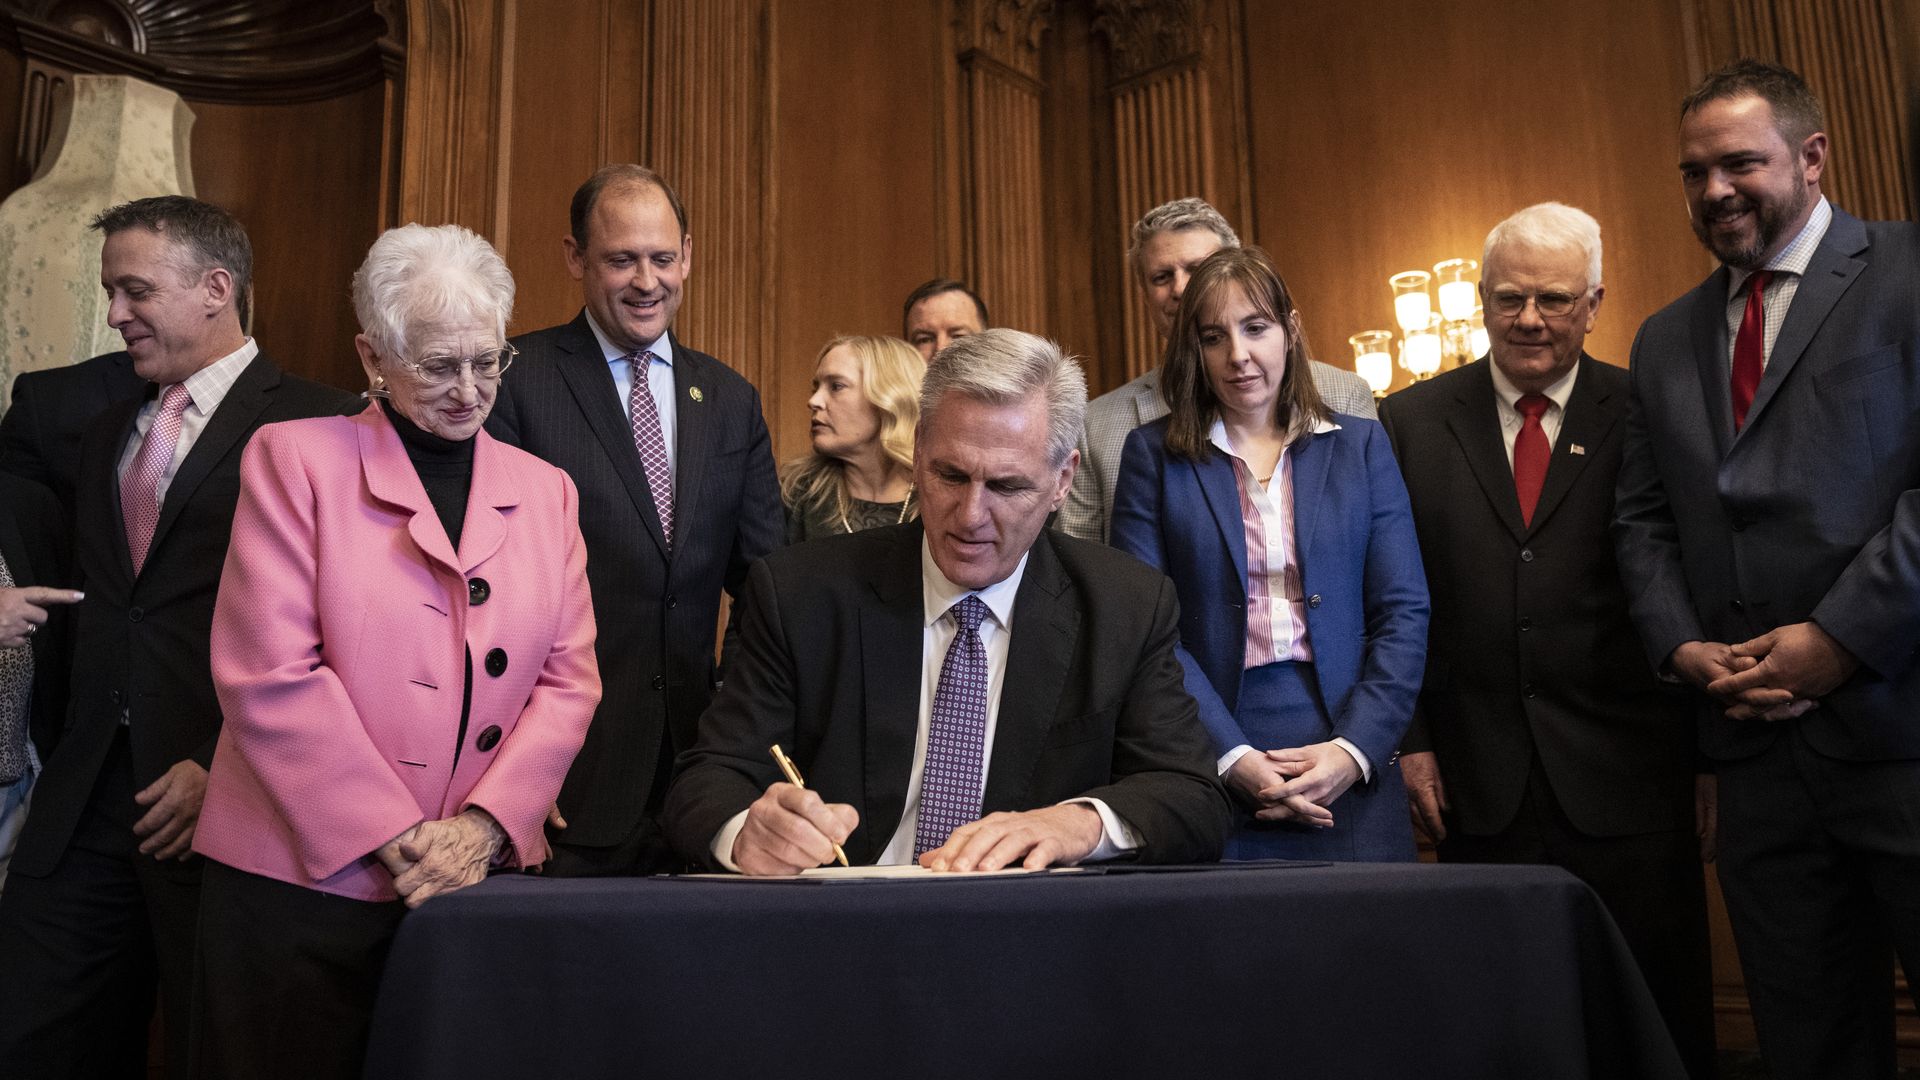 House Speaker Kevin McCarthy, wearing a dark gray suit, white shirt and purple time, enrolls an anti-ESG bill surrounded by colleagues and others.